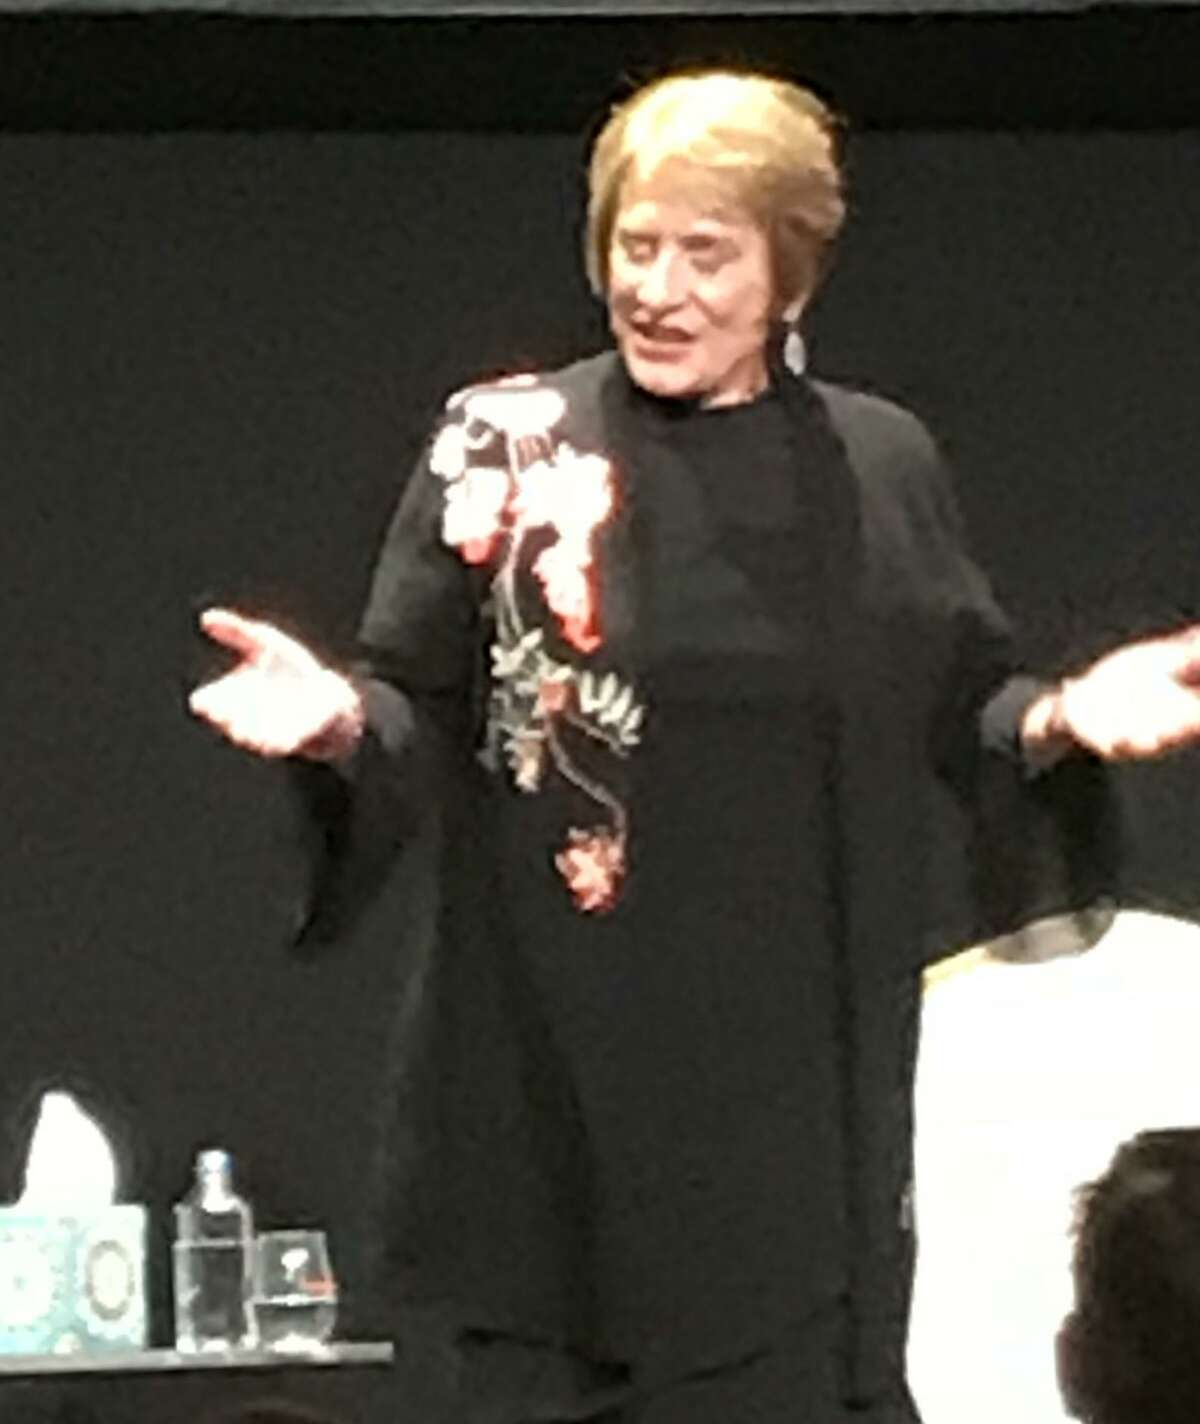 Patti LuPone onstage at the Curran